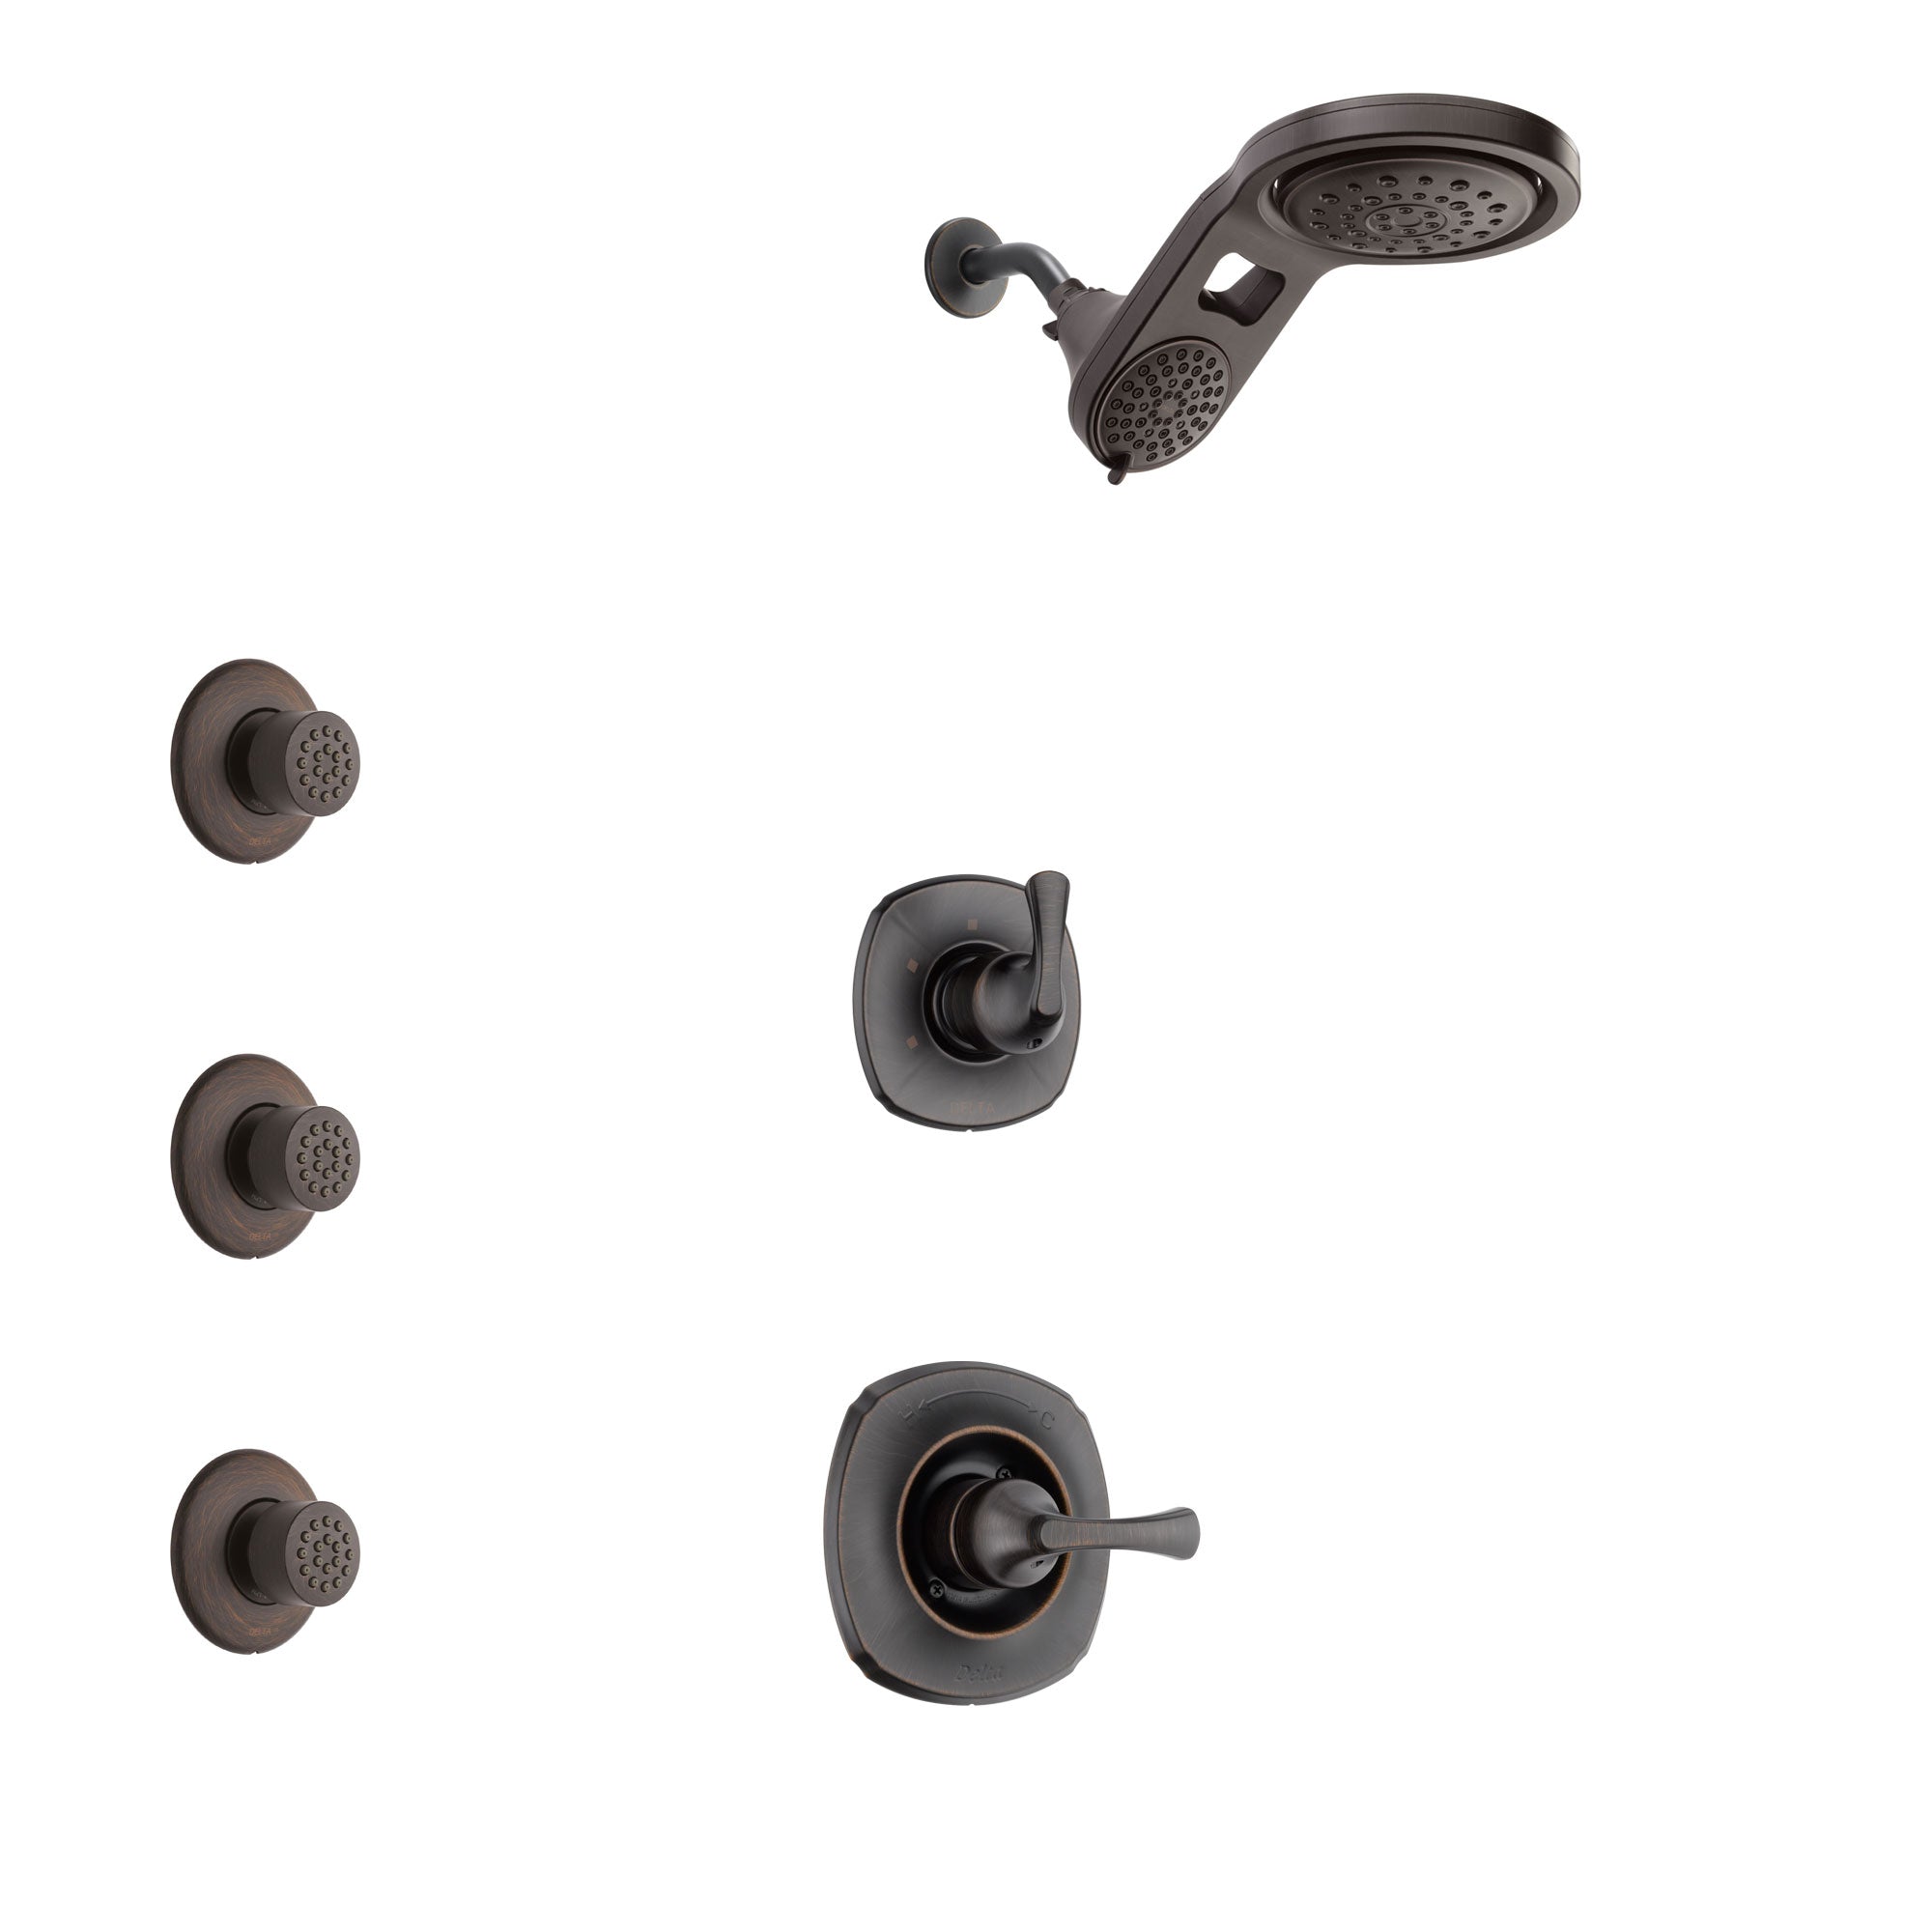 Delta Addison Venetian Bronze Finish Shower System with Control Handle, 3-Setting Diverter, Dual Showerhead, and 3 Body Sprays SS1492RB7